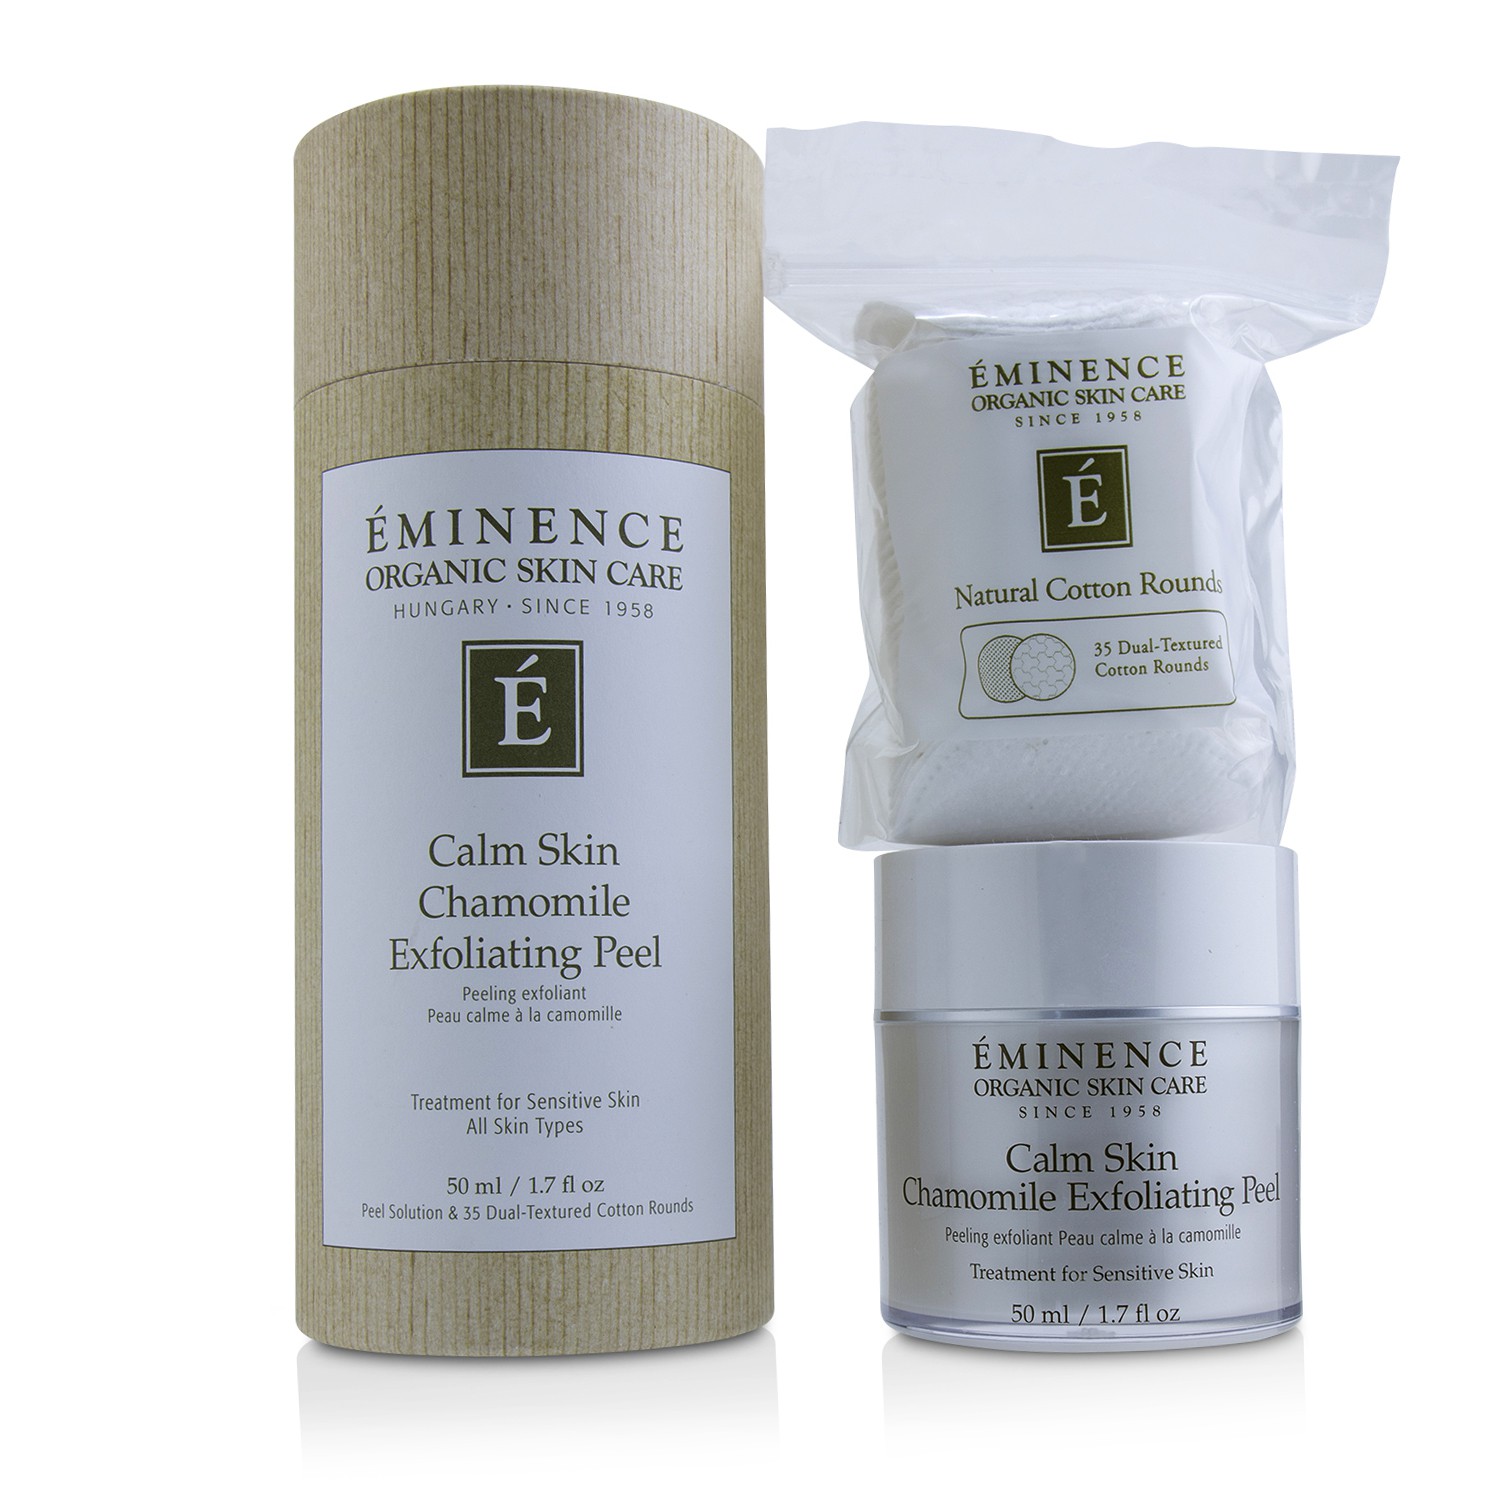 Calm Skin Chamomile Exfoliating Peel (with 35 Dual-Textured Cotton Rounds) Eminence Image